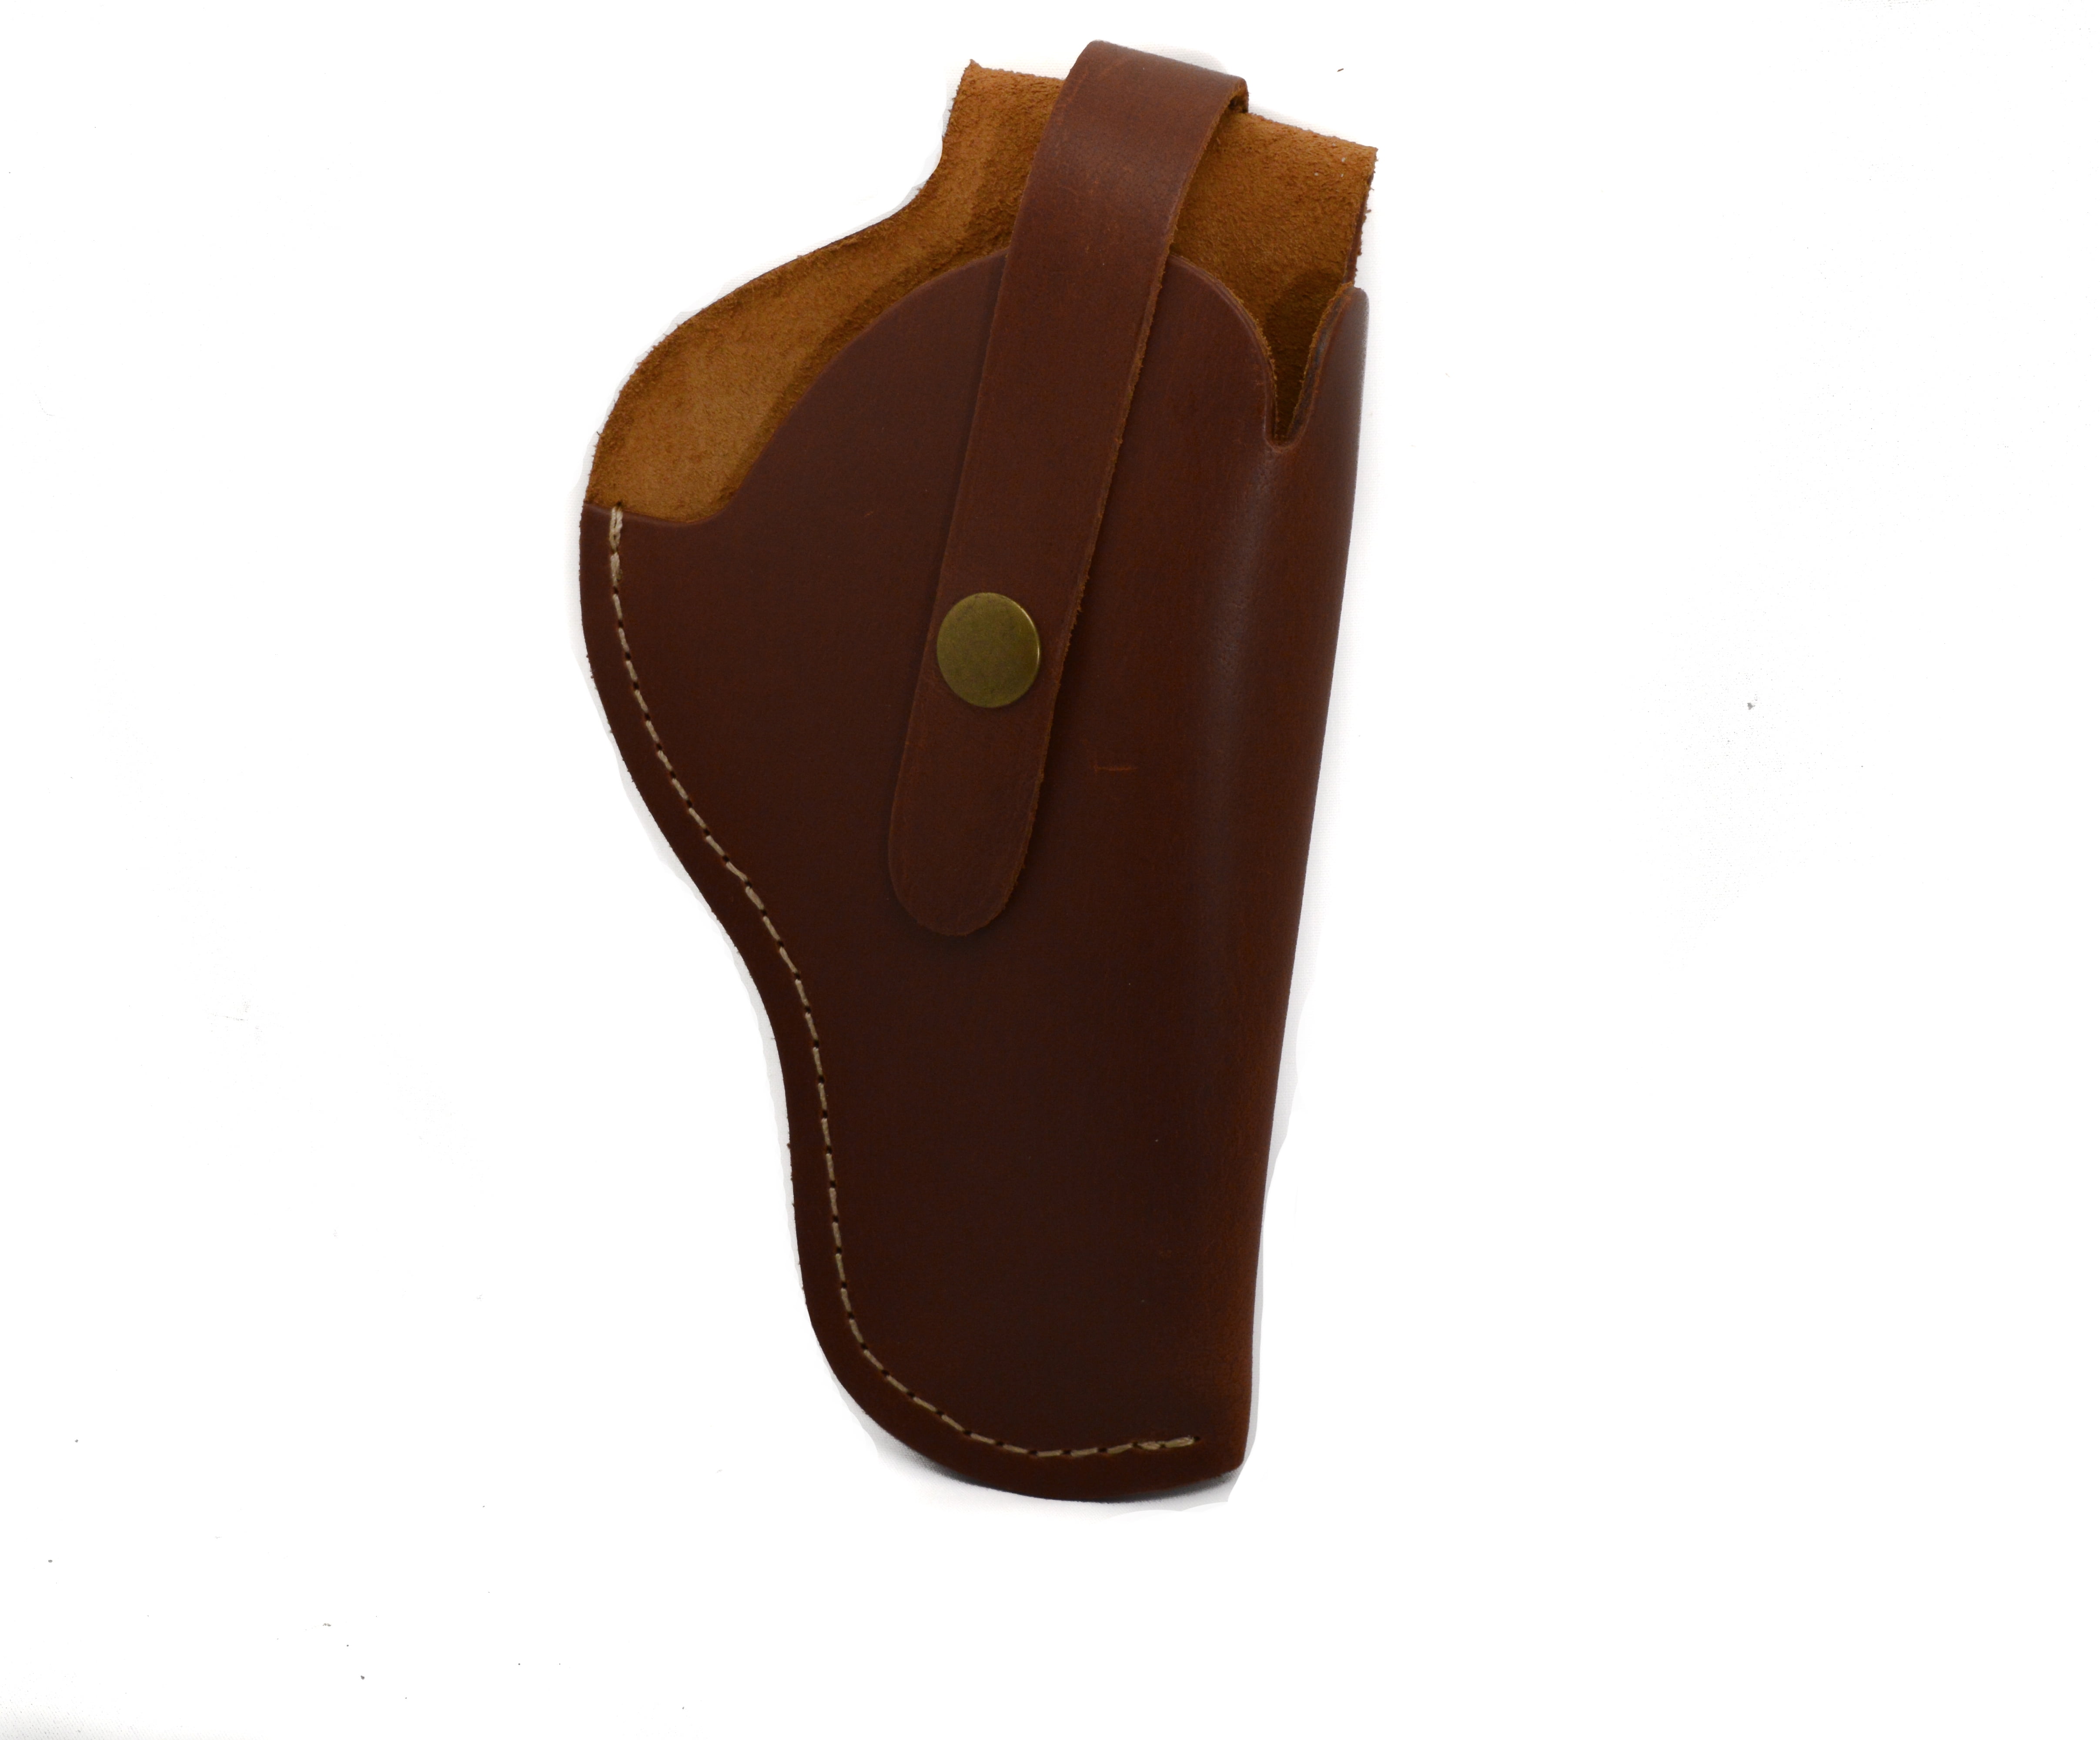 Leather Phone Holster Made With Genuine Buffalo Leather by